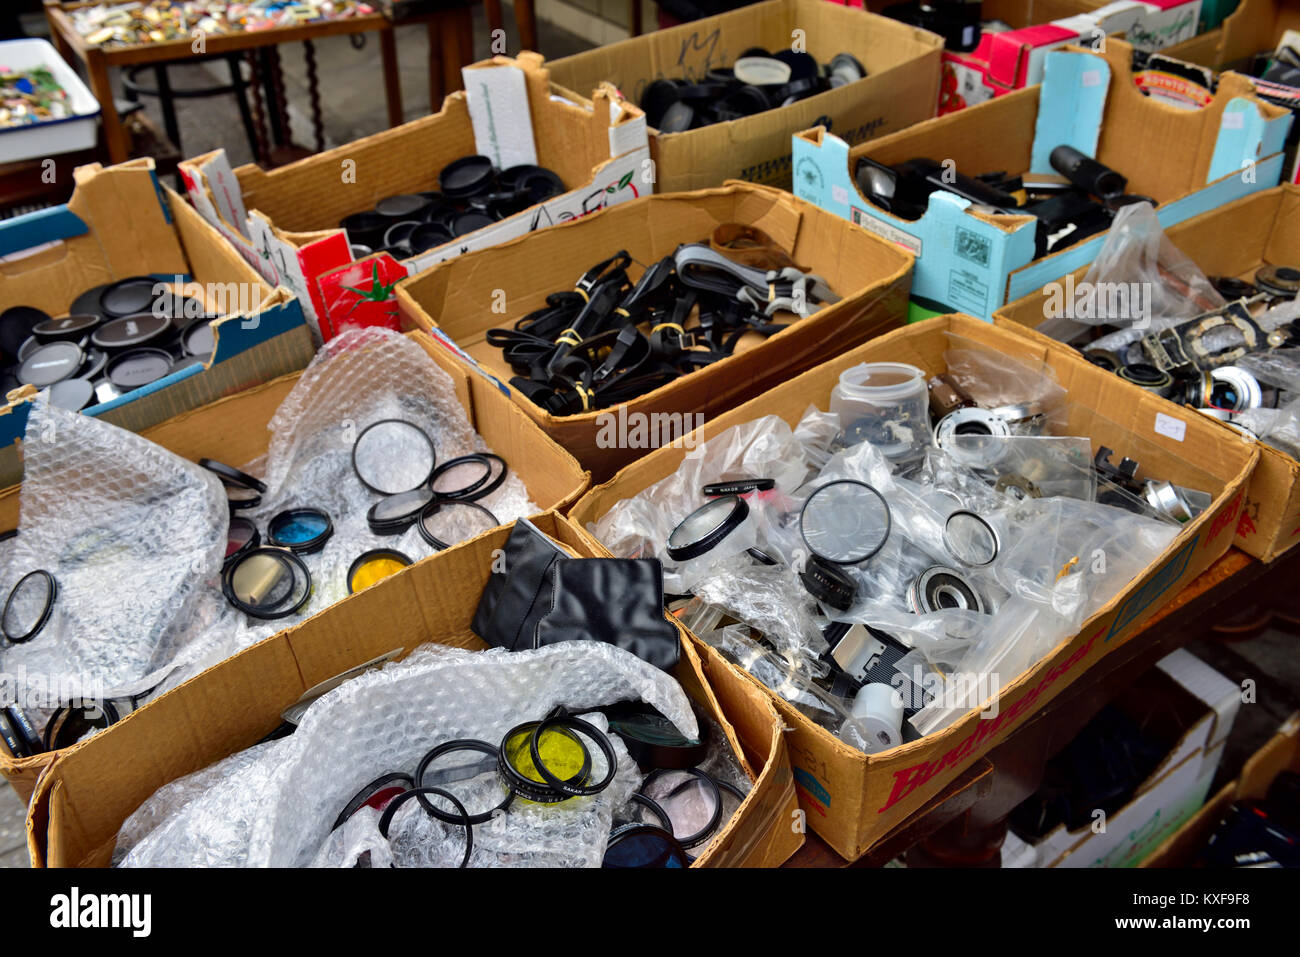 Flea market with boxes of camera filters and accessories on stall, Athens, Greece Stock Photo